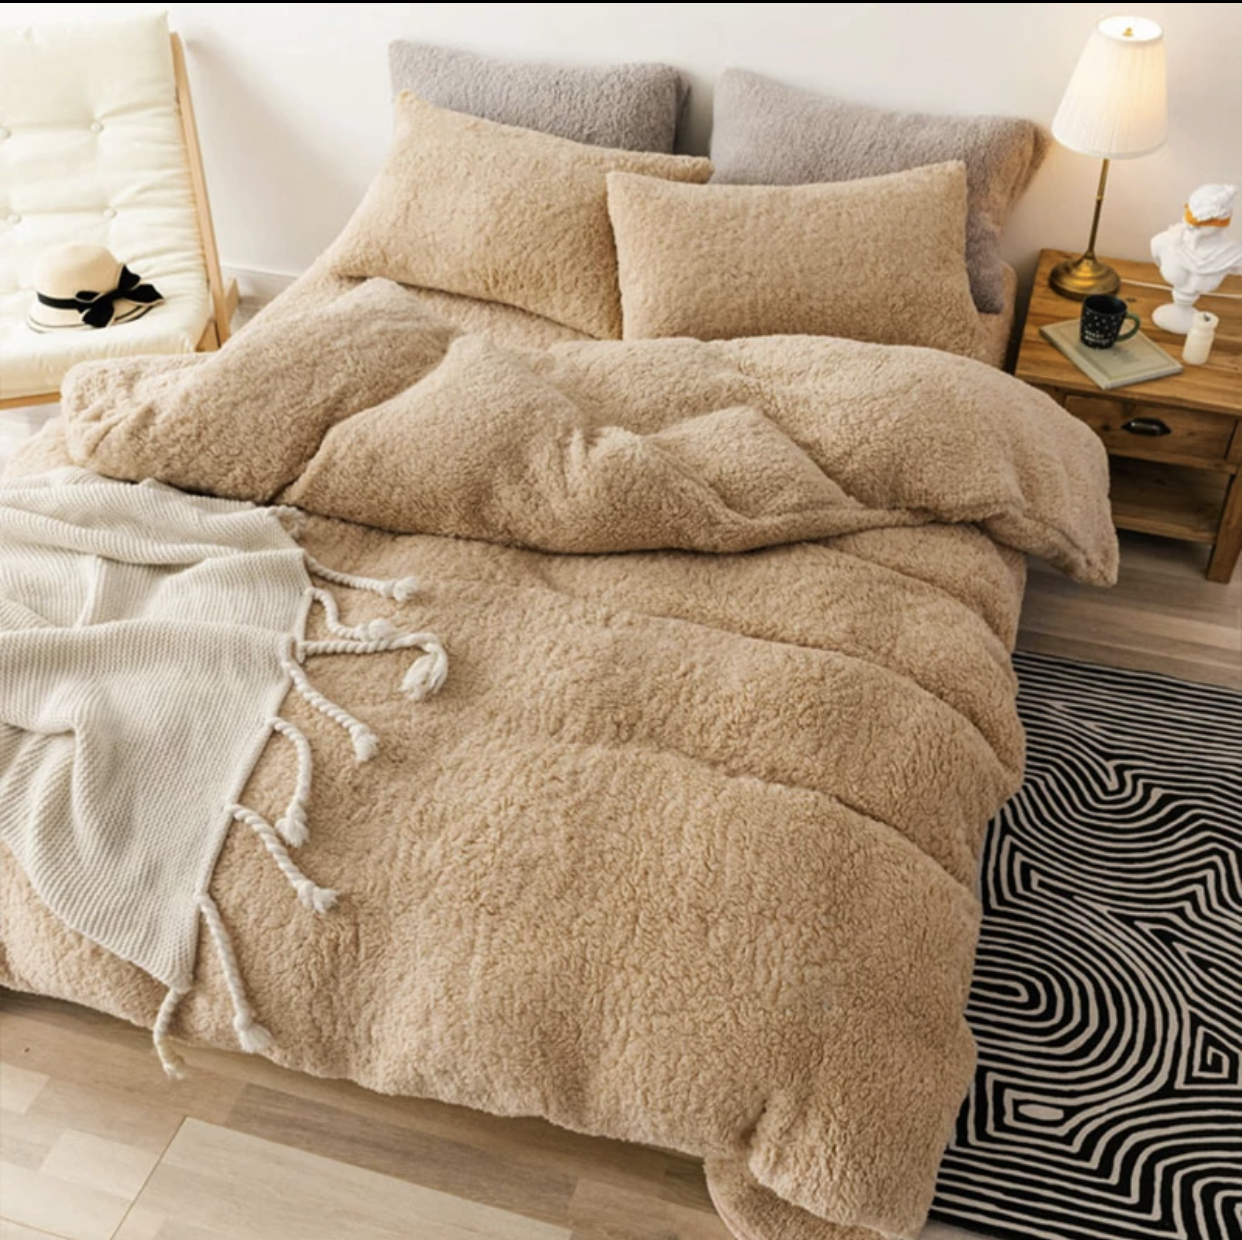 Teddy Bear Fleece Fitted Sheet OR Duvet Cover Set Sherpa Thermal Warm Bedding Champagne Gold